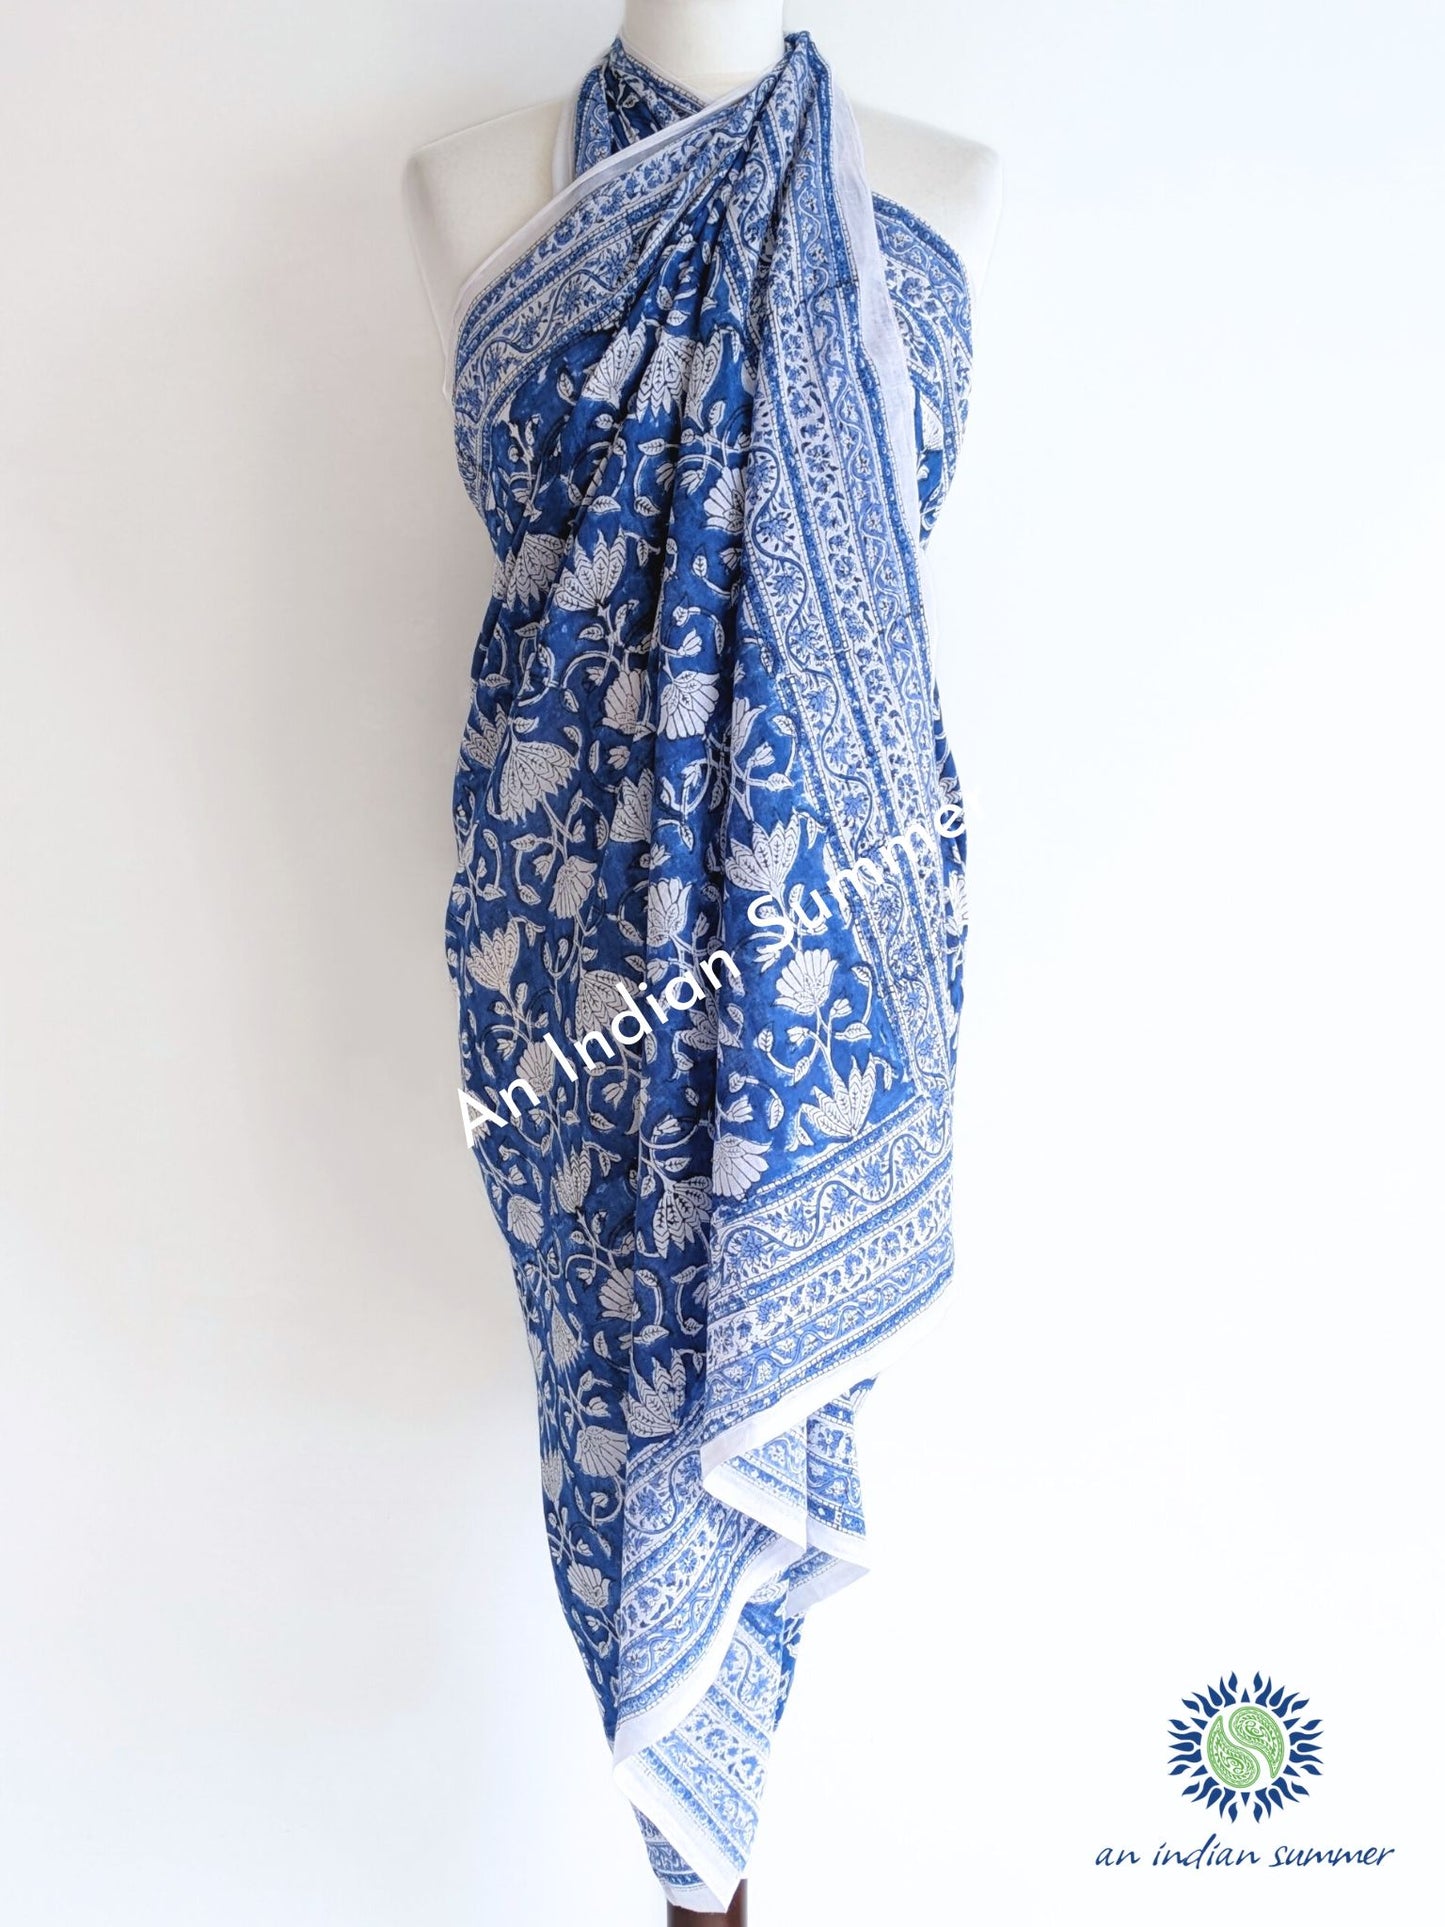 Lotus Sarong Pareo | Blue | Hand Block Printed | Soft Cotton Voile | An Indian Summer | Seasonless Timeless Sustainable Ethical Authentic Artisan Conscious Clothing Lifestyle Brand